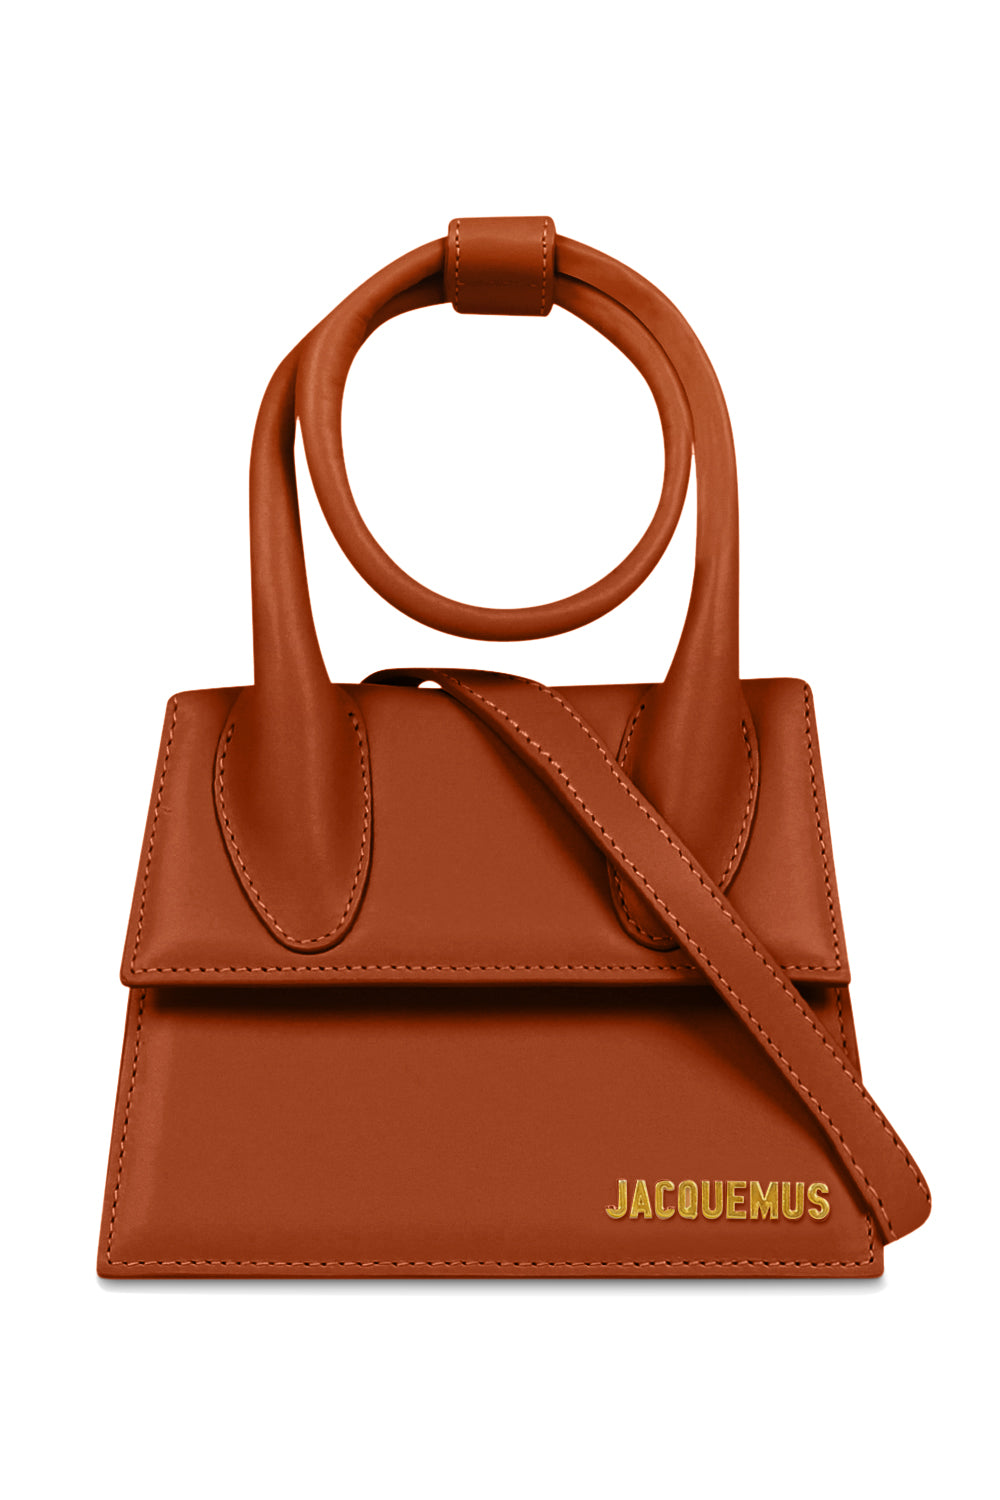 JACQUEMUS BAGS BROWN LE CHIQUITO NOEUD BAG | LIGHT BROWN